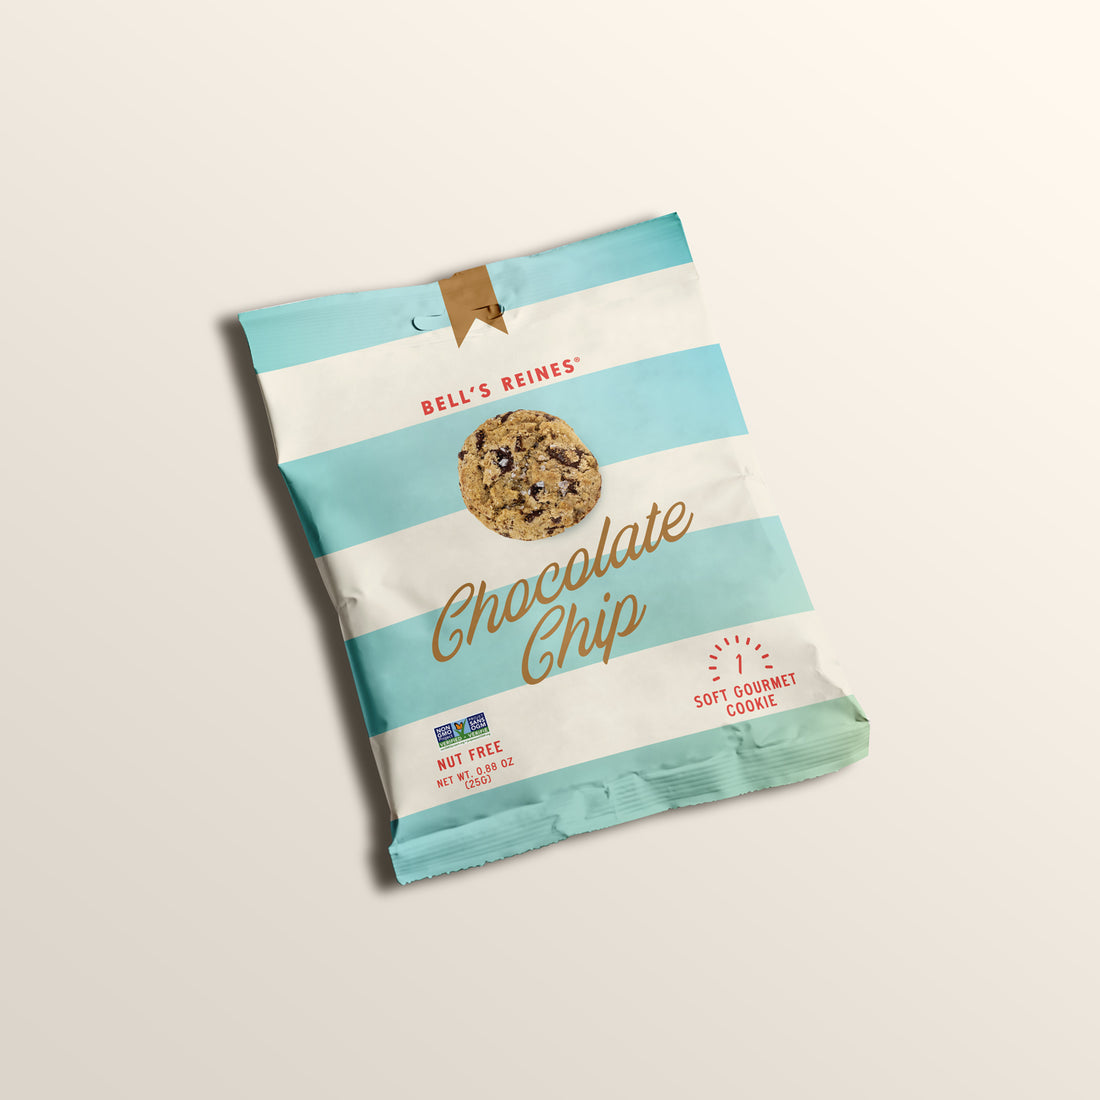 *** NEW CHOCOLATE CHIP SINGLE SNACK PACKS*** - Bell’s Reines